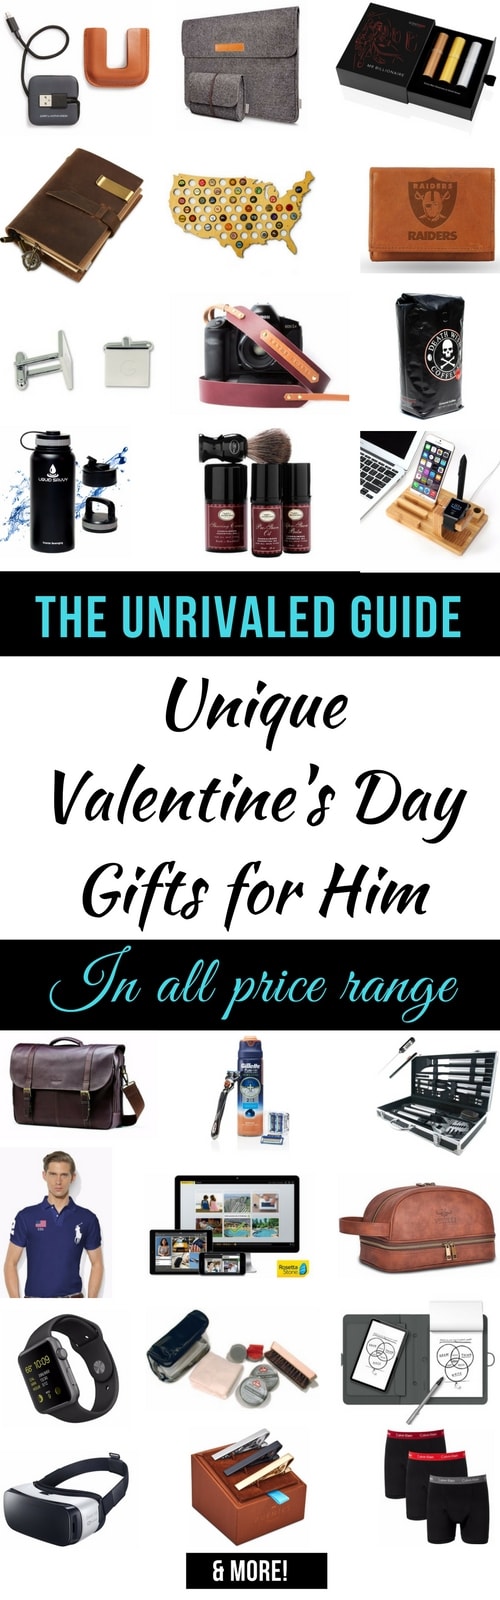 This is your ultimate guide to the best Valentine’s Day gifts for him this season. Includes everything from the best outdoor gears to the most-wanted clothing and devices for men. A roundup of budget-friendly gift ideas even for the man who has everything. All about best gifts, last minute gift ideas, Valentine gifts. #giftguide #gifts #gifts for him